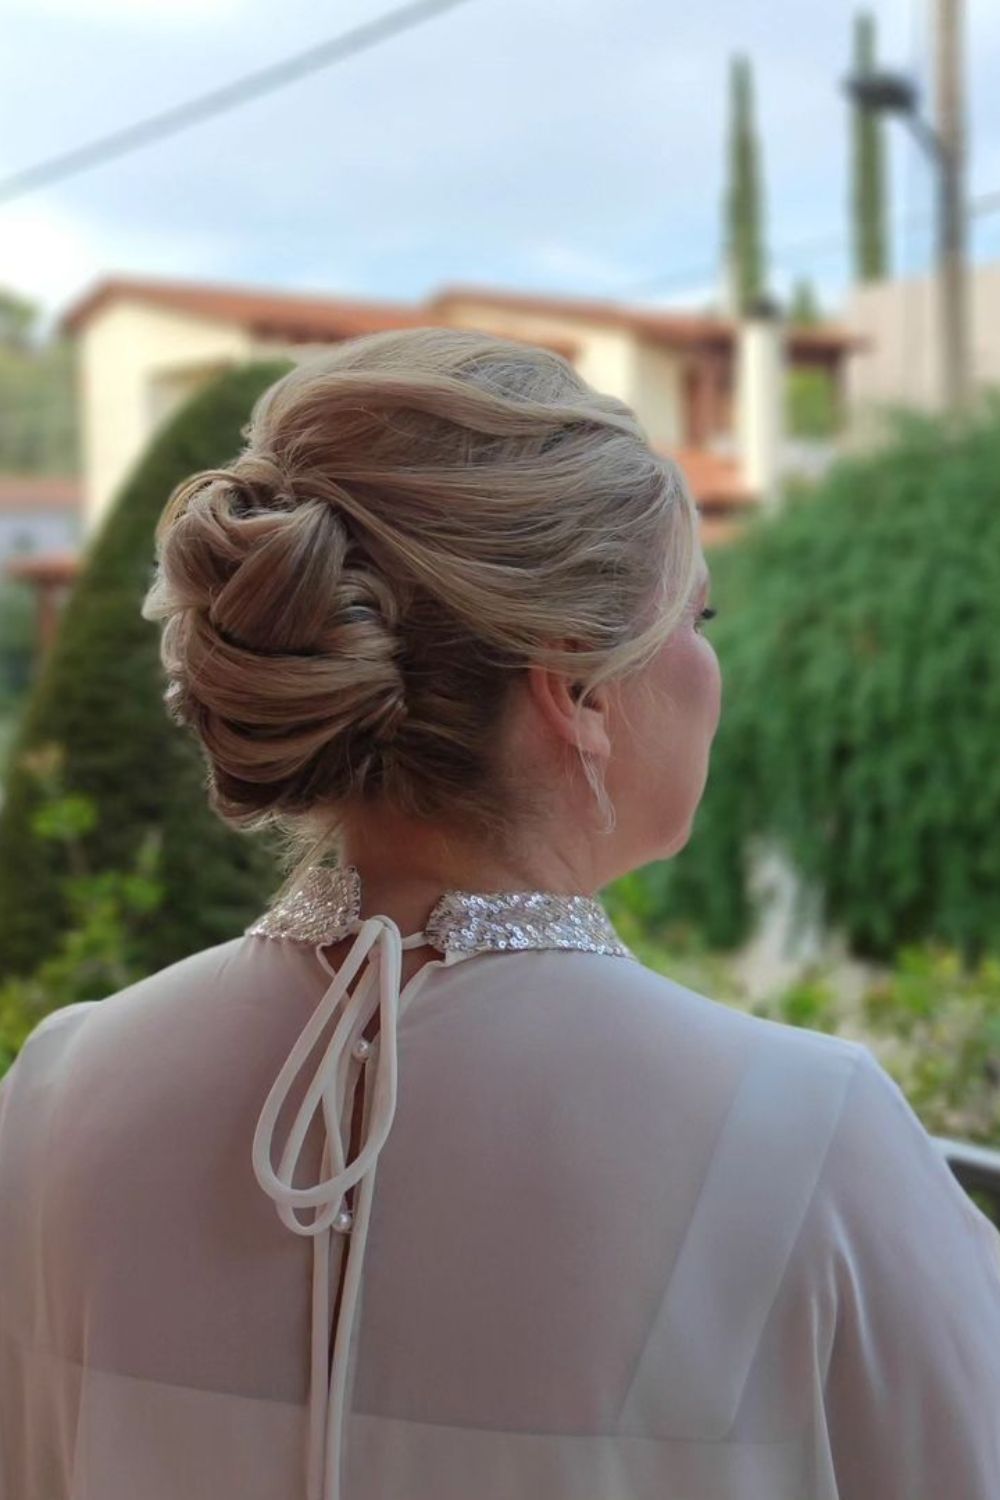 A woman with a blonde low chignon.